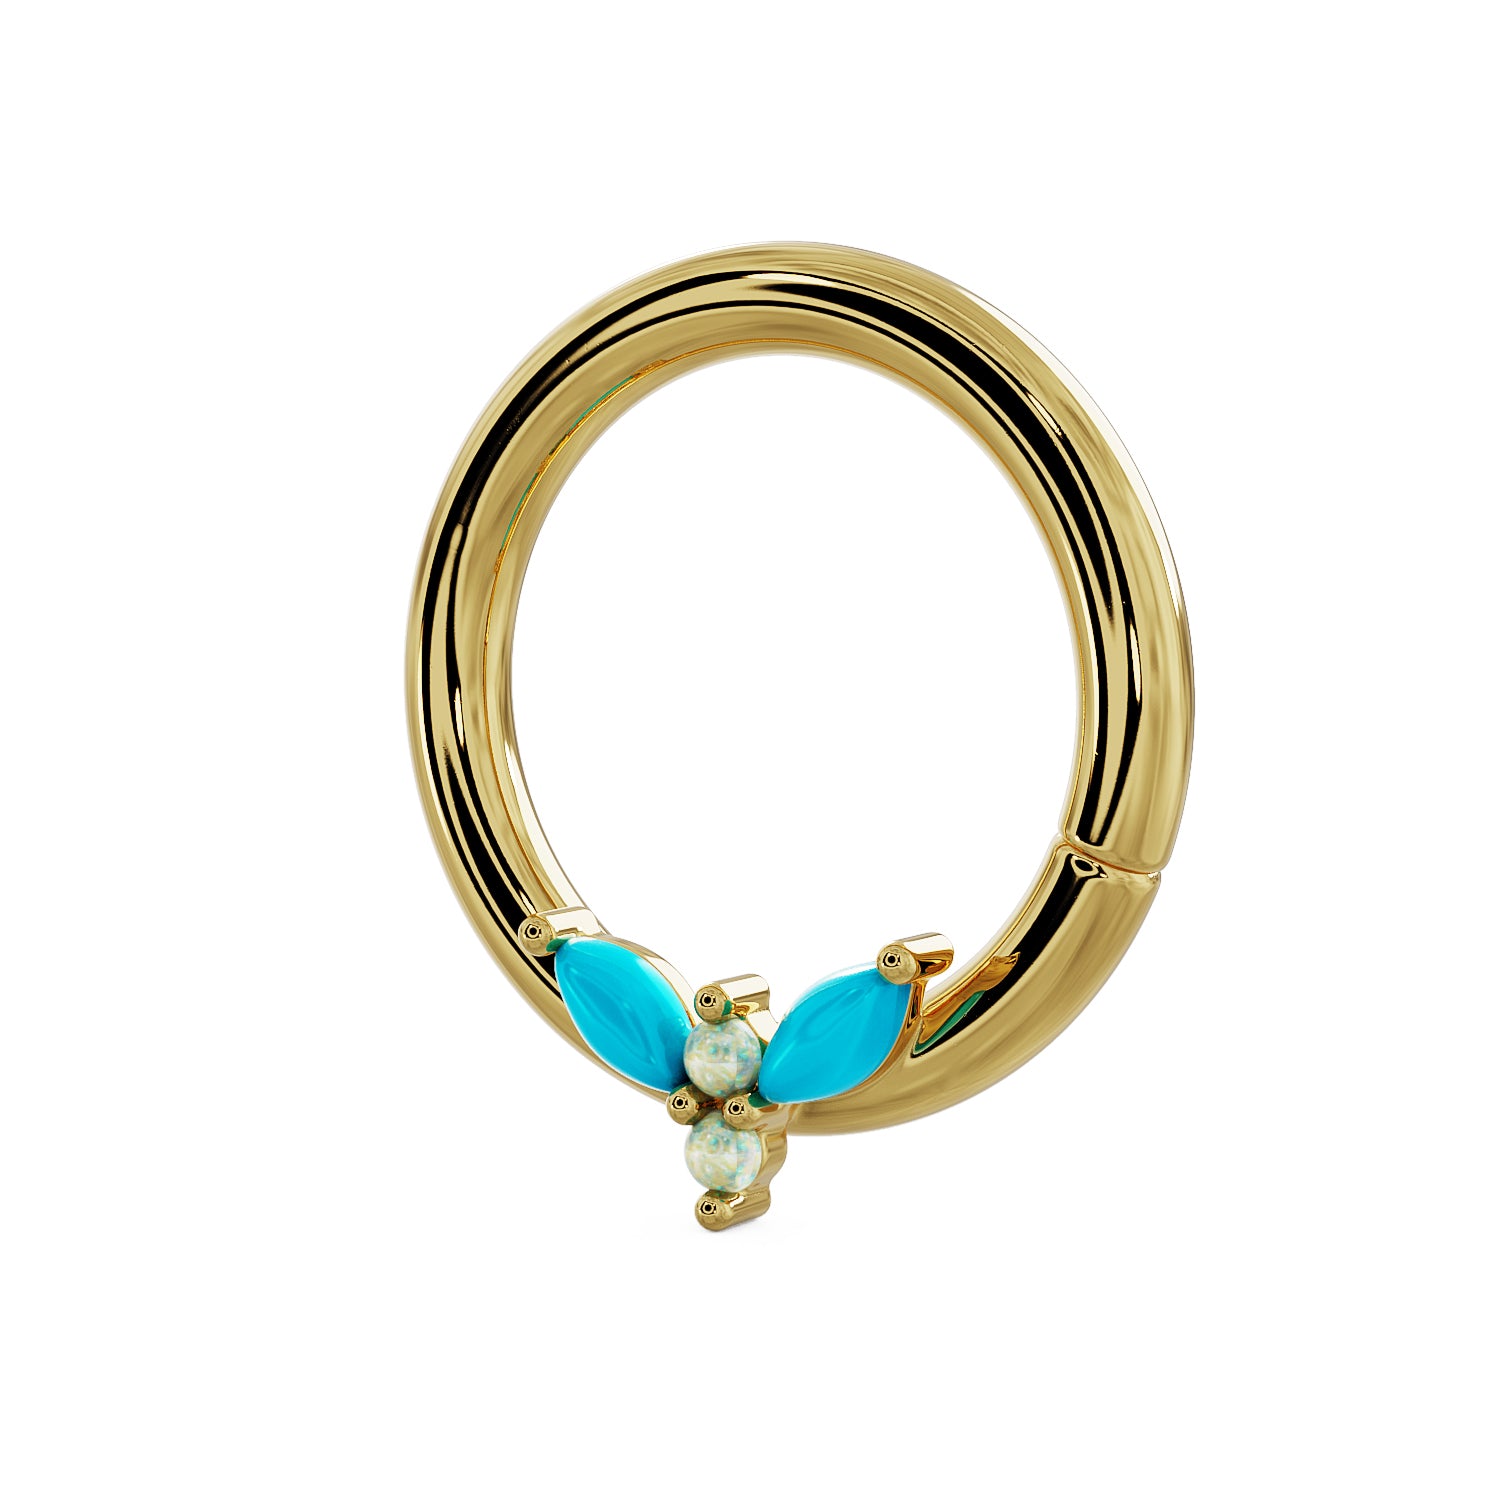 Firefly Opal & Turquoise 14K Gold Seam Ring Hoop